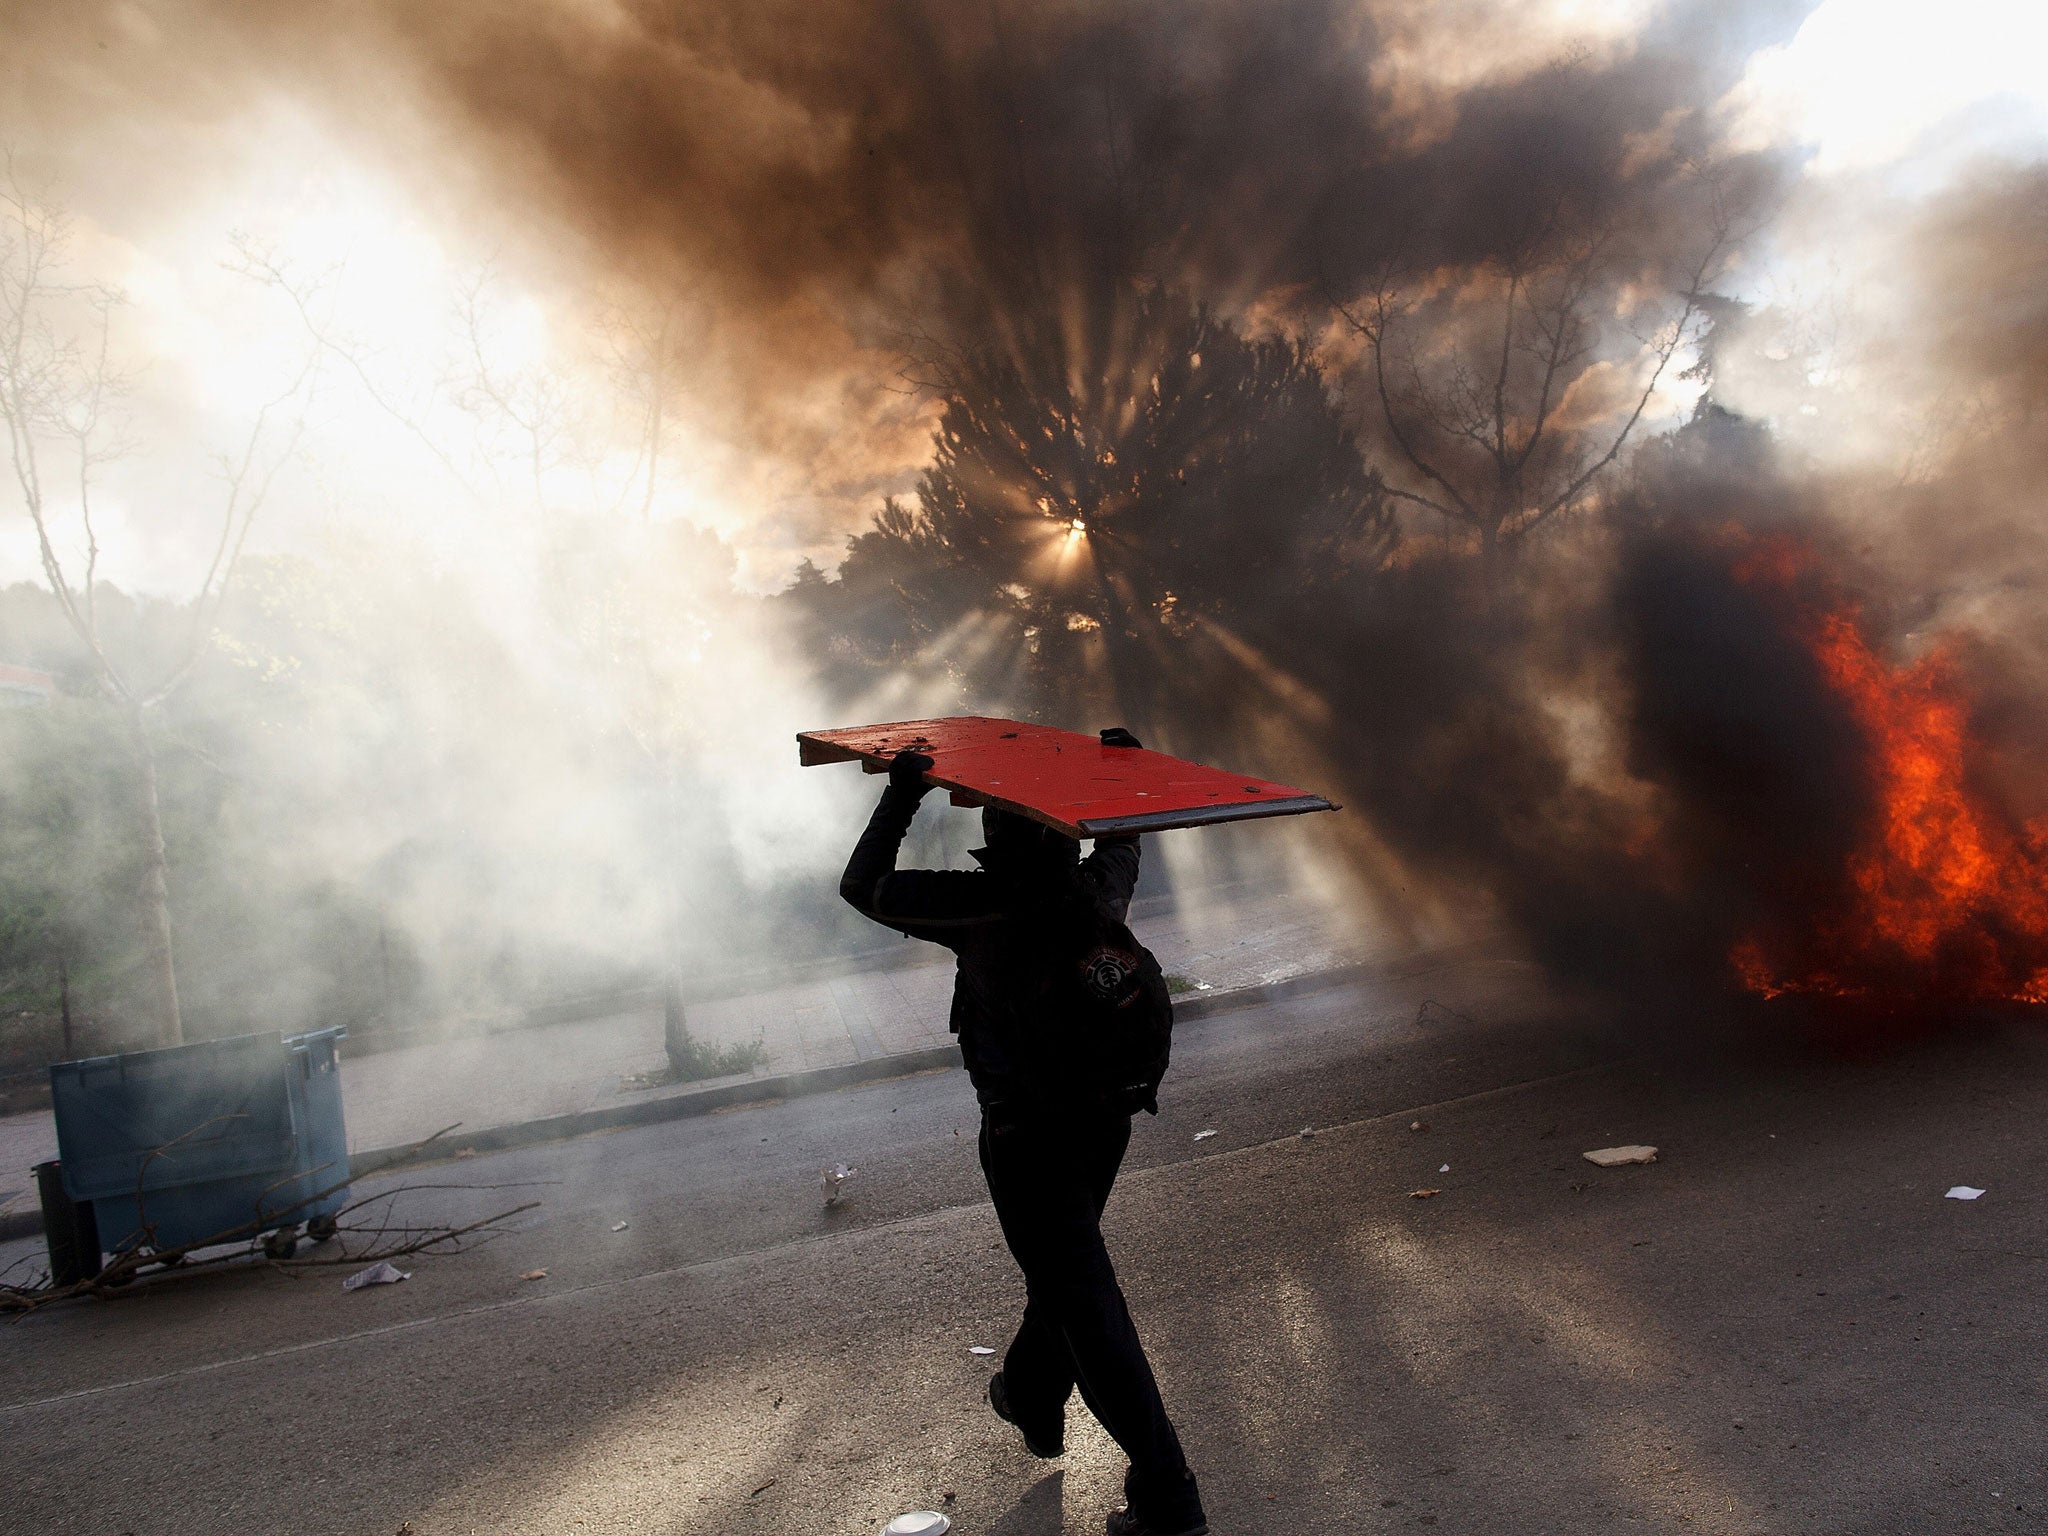 A protester carries a wooden table as he walks next to a burning barricade during a protest against the government's education reforms and cutbacks in university grants and staffing in Campus Ciudad Universitaria in Madrid